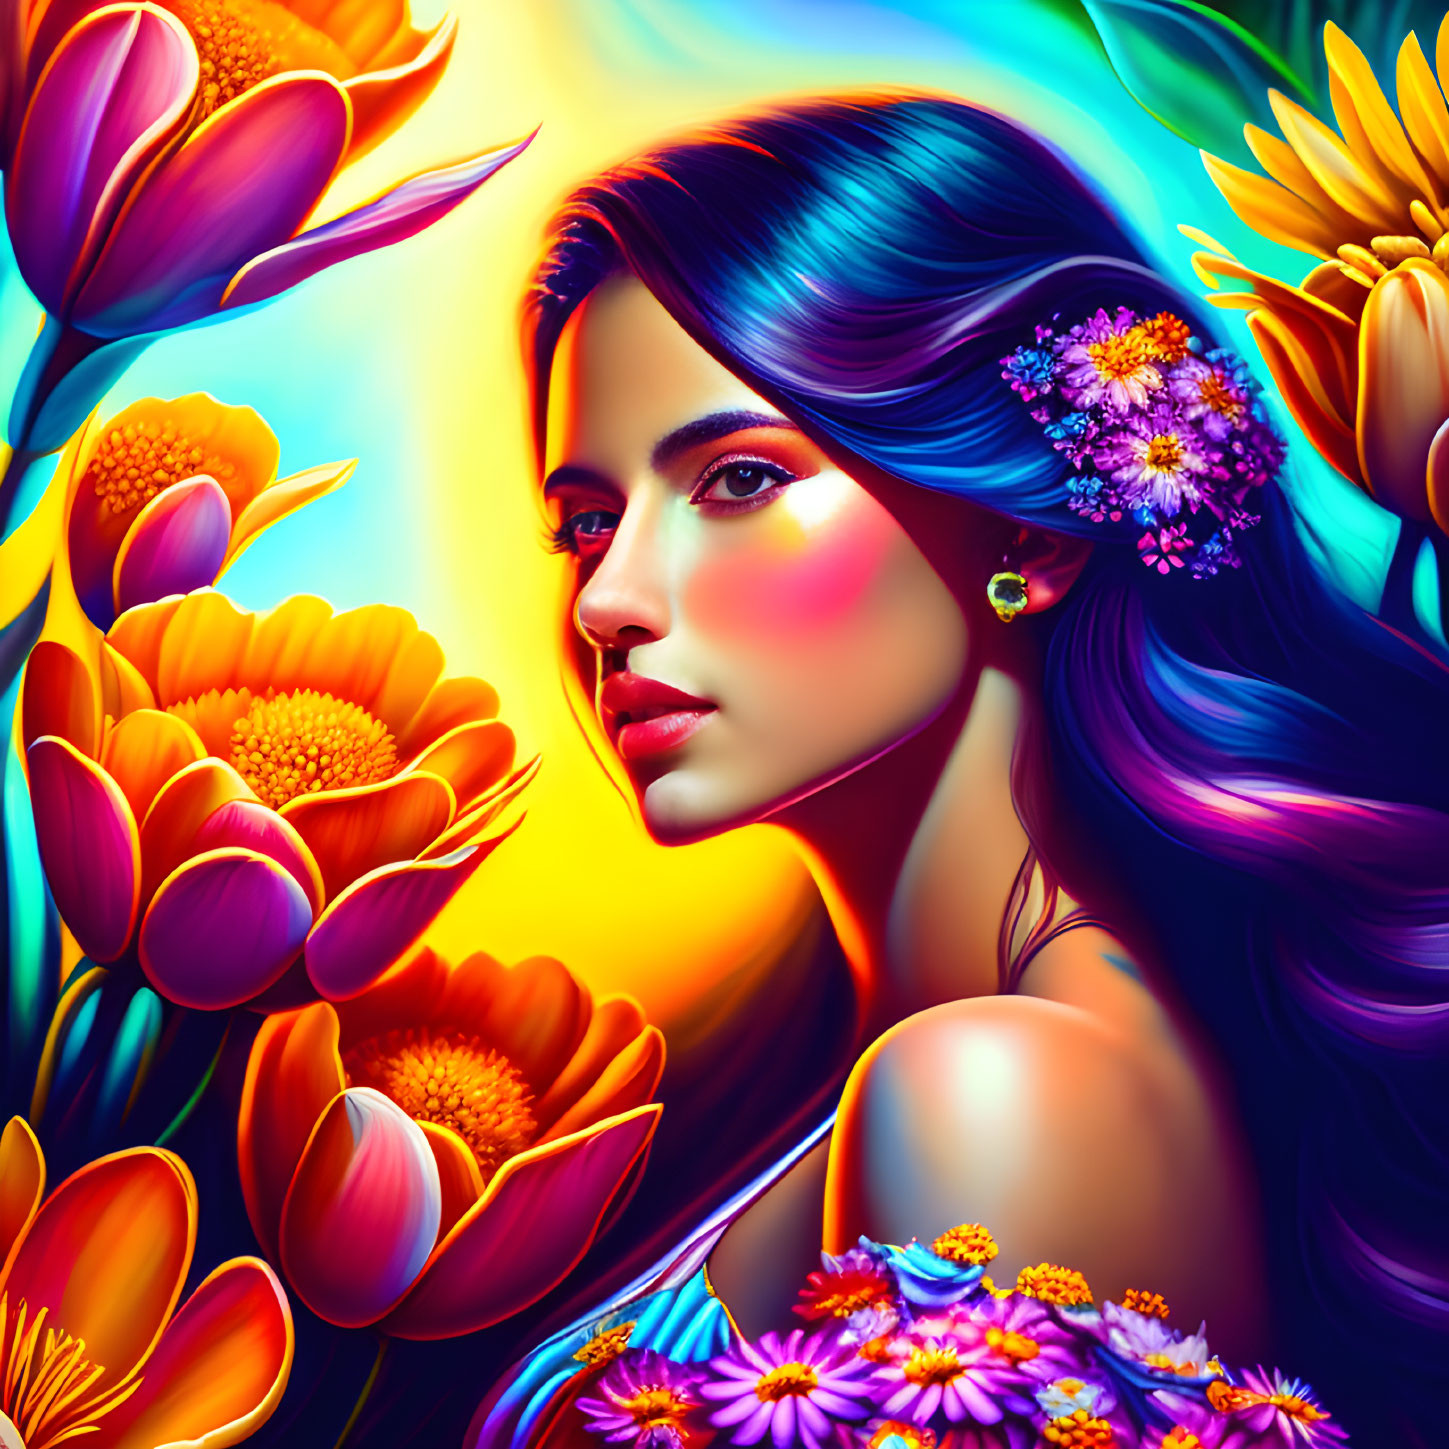 Illustrated portrait of woman with blue hair and floral adornments in vibrant floral setting